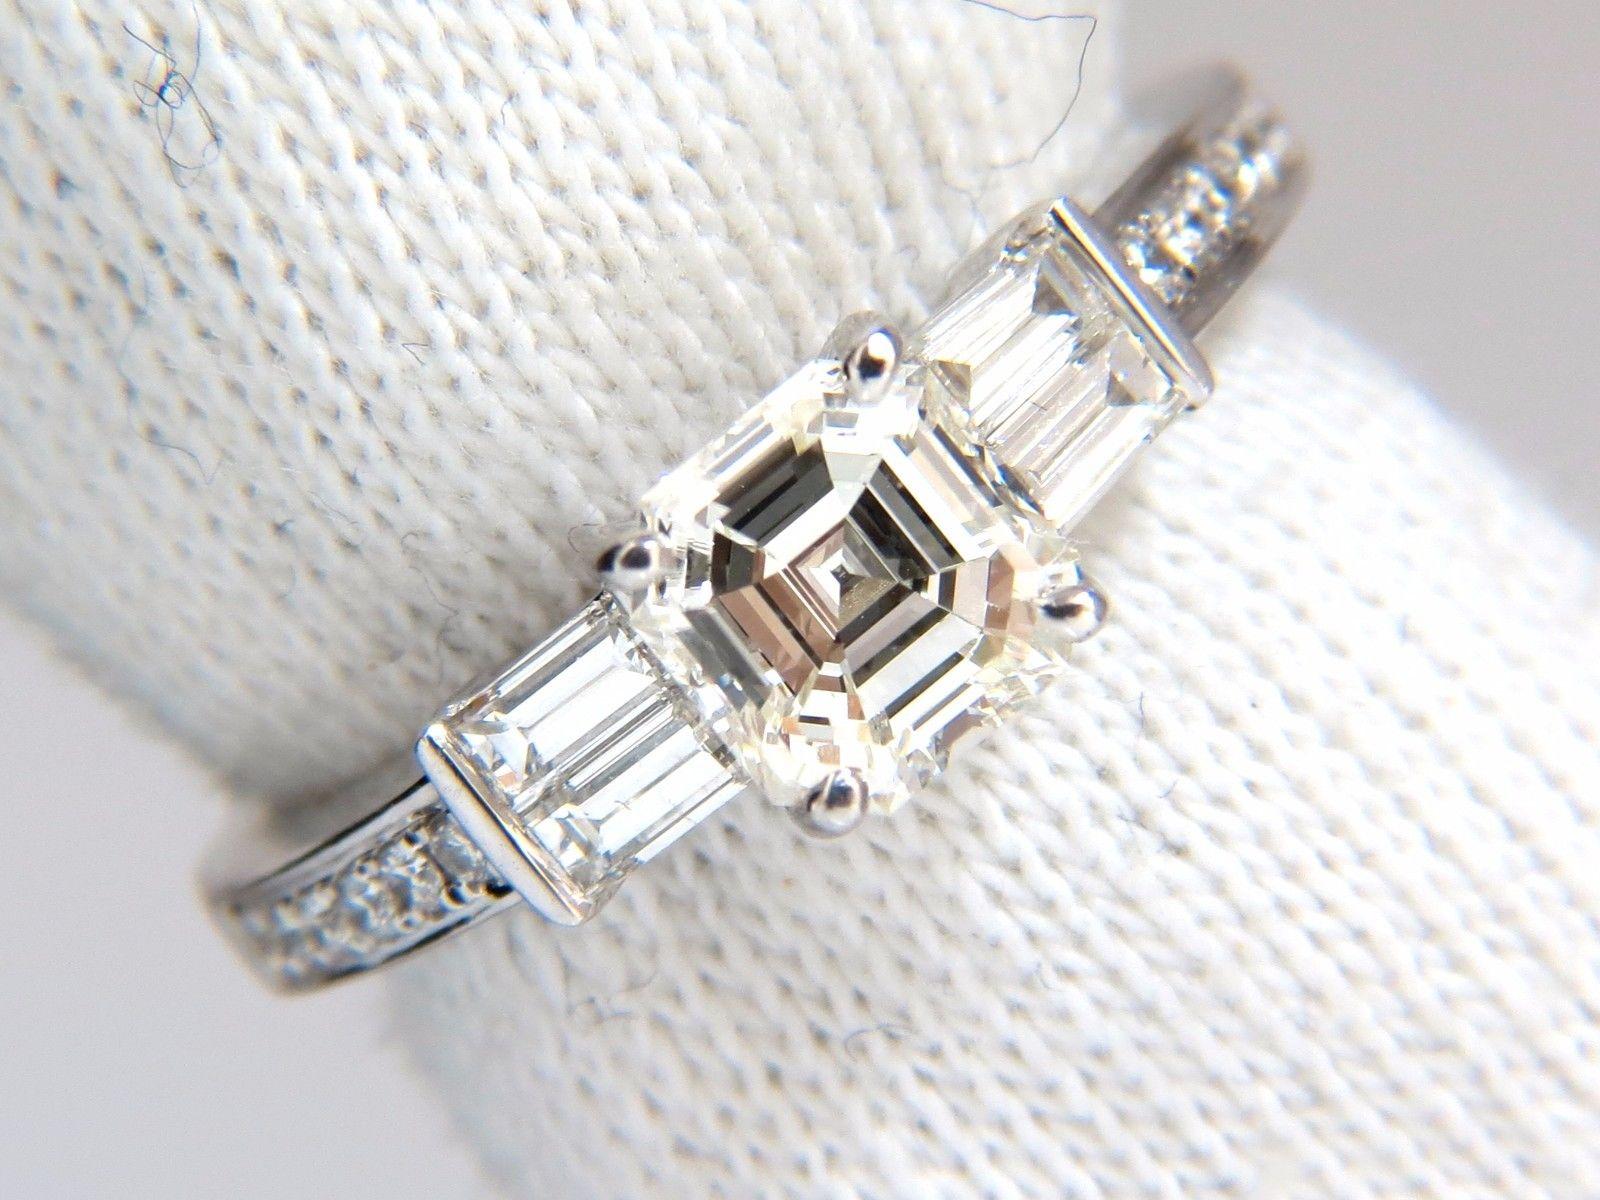 Traditional Asscher Prime

GIA Certified Diamond engagement ring.

1.12ct. Natural Asscher Cut diamond

GIA Certificate:  6167351406

J color VVs-2 clarity 

6.14 X 5.98 X 3.87mm

(Please see report copy attached)

.40ct Side baguette